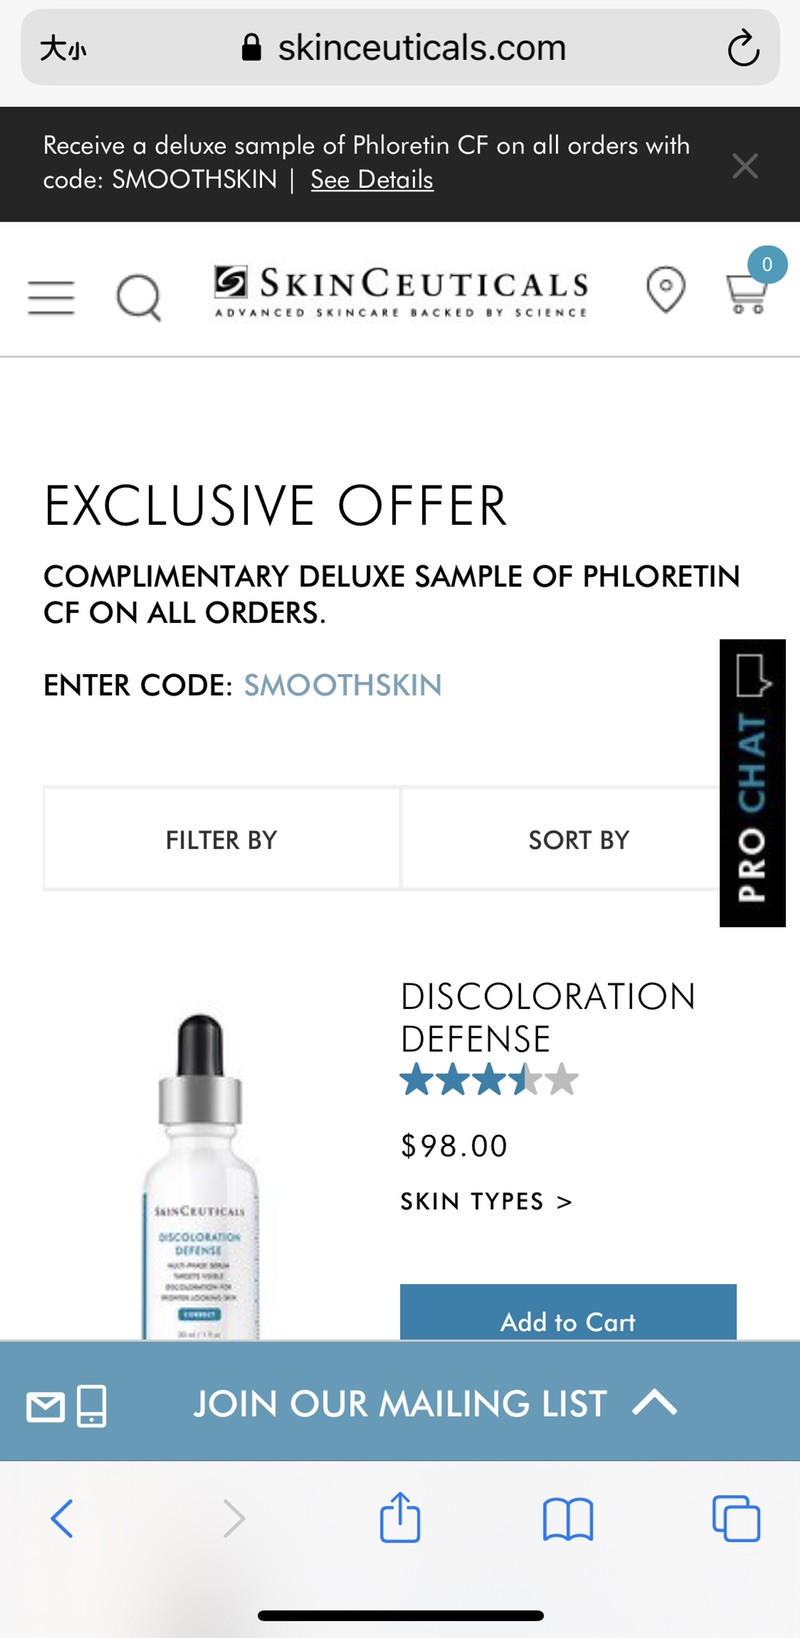 Shop Quality Skincare Products Backed by Science at SkinCeuticals.com

任意单送PHLORETIN CF 4ml
CODE: SMOOTHSKIN